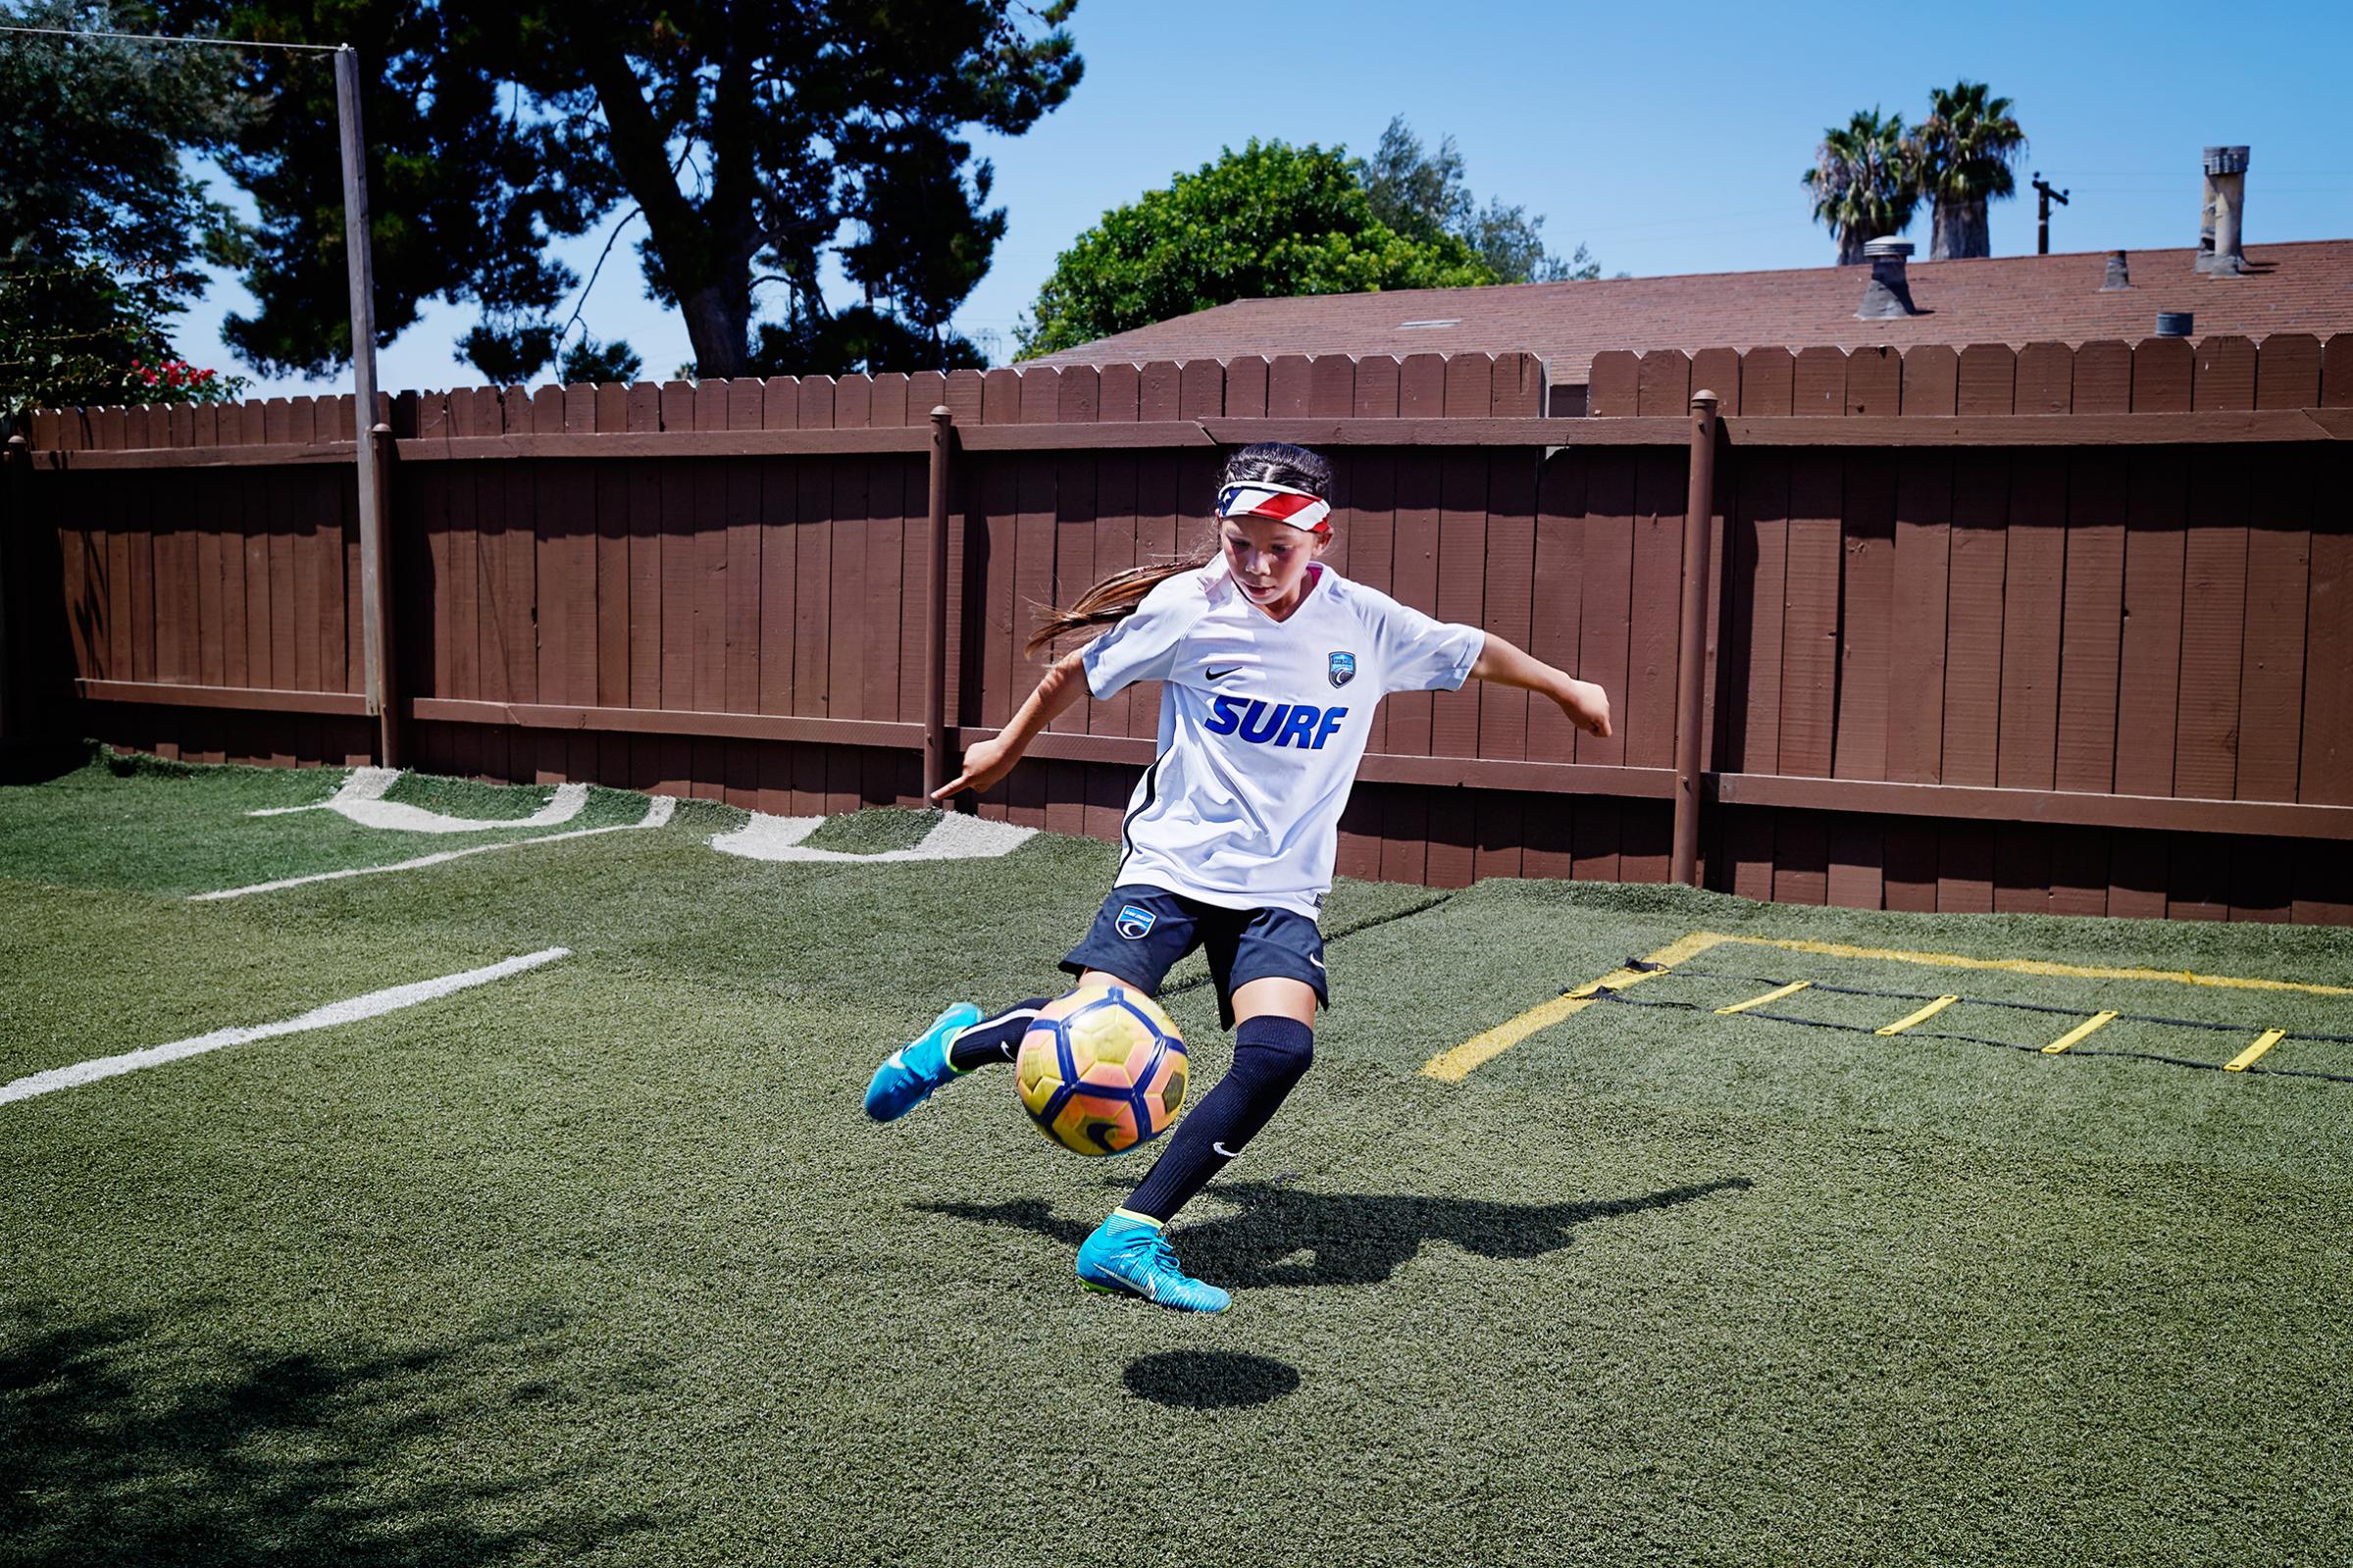 Melanie Barcenas, 9, practicing in her San Diego backyard, hopes to follow in the footsteps of the superstar Neymar. “He plays just like me,” she says. Melanie plays multiple soccer games most weekends. To save money, her family stays in a hotel only if a game is more than a four-hour drive from home. Here Melanie is photographed at home where her father Carlos made a practice field for her in their backyard, on Aug. 3, 2017.